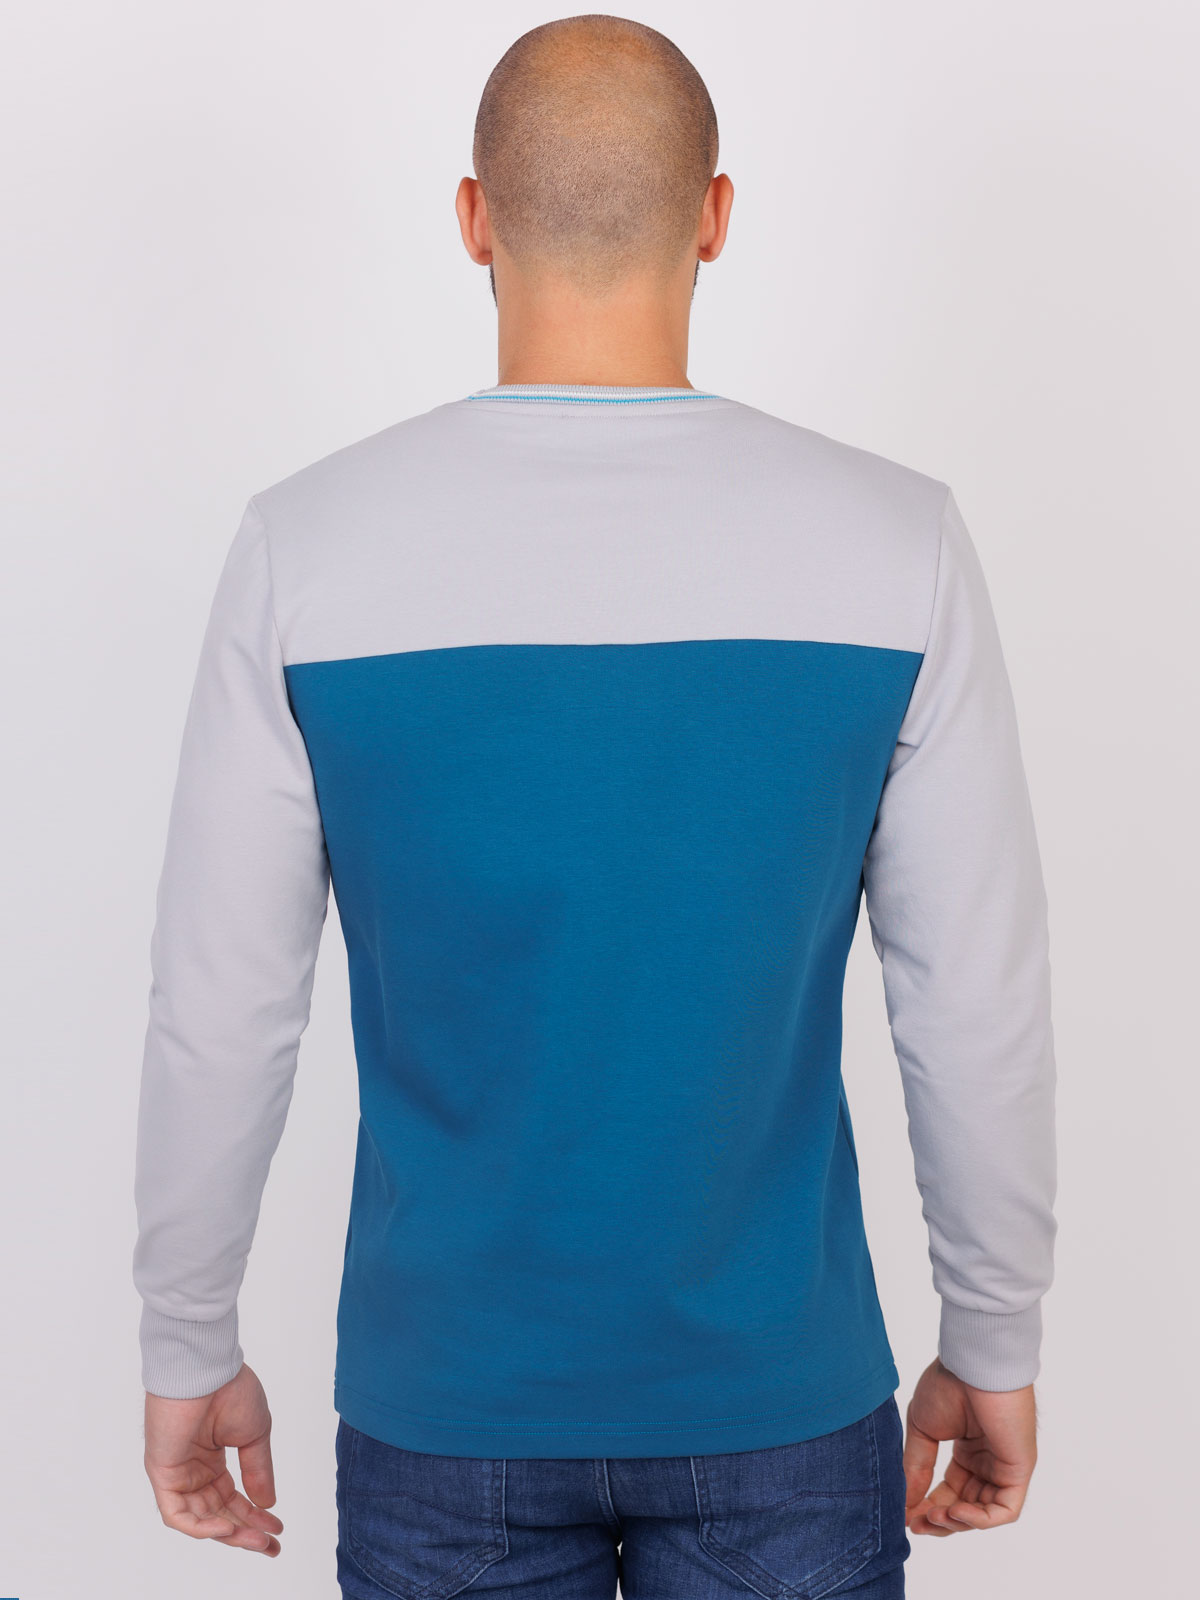 Mens blouse in blue and gray - 42351 € 27.56 img2